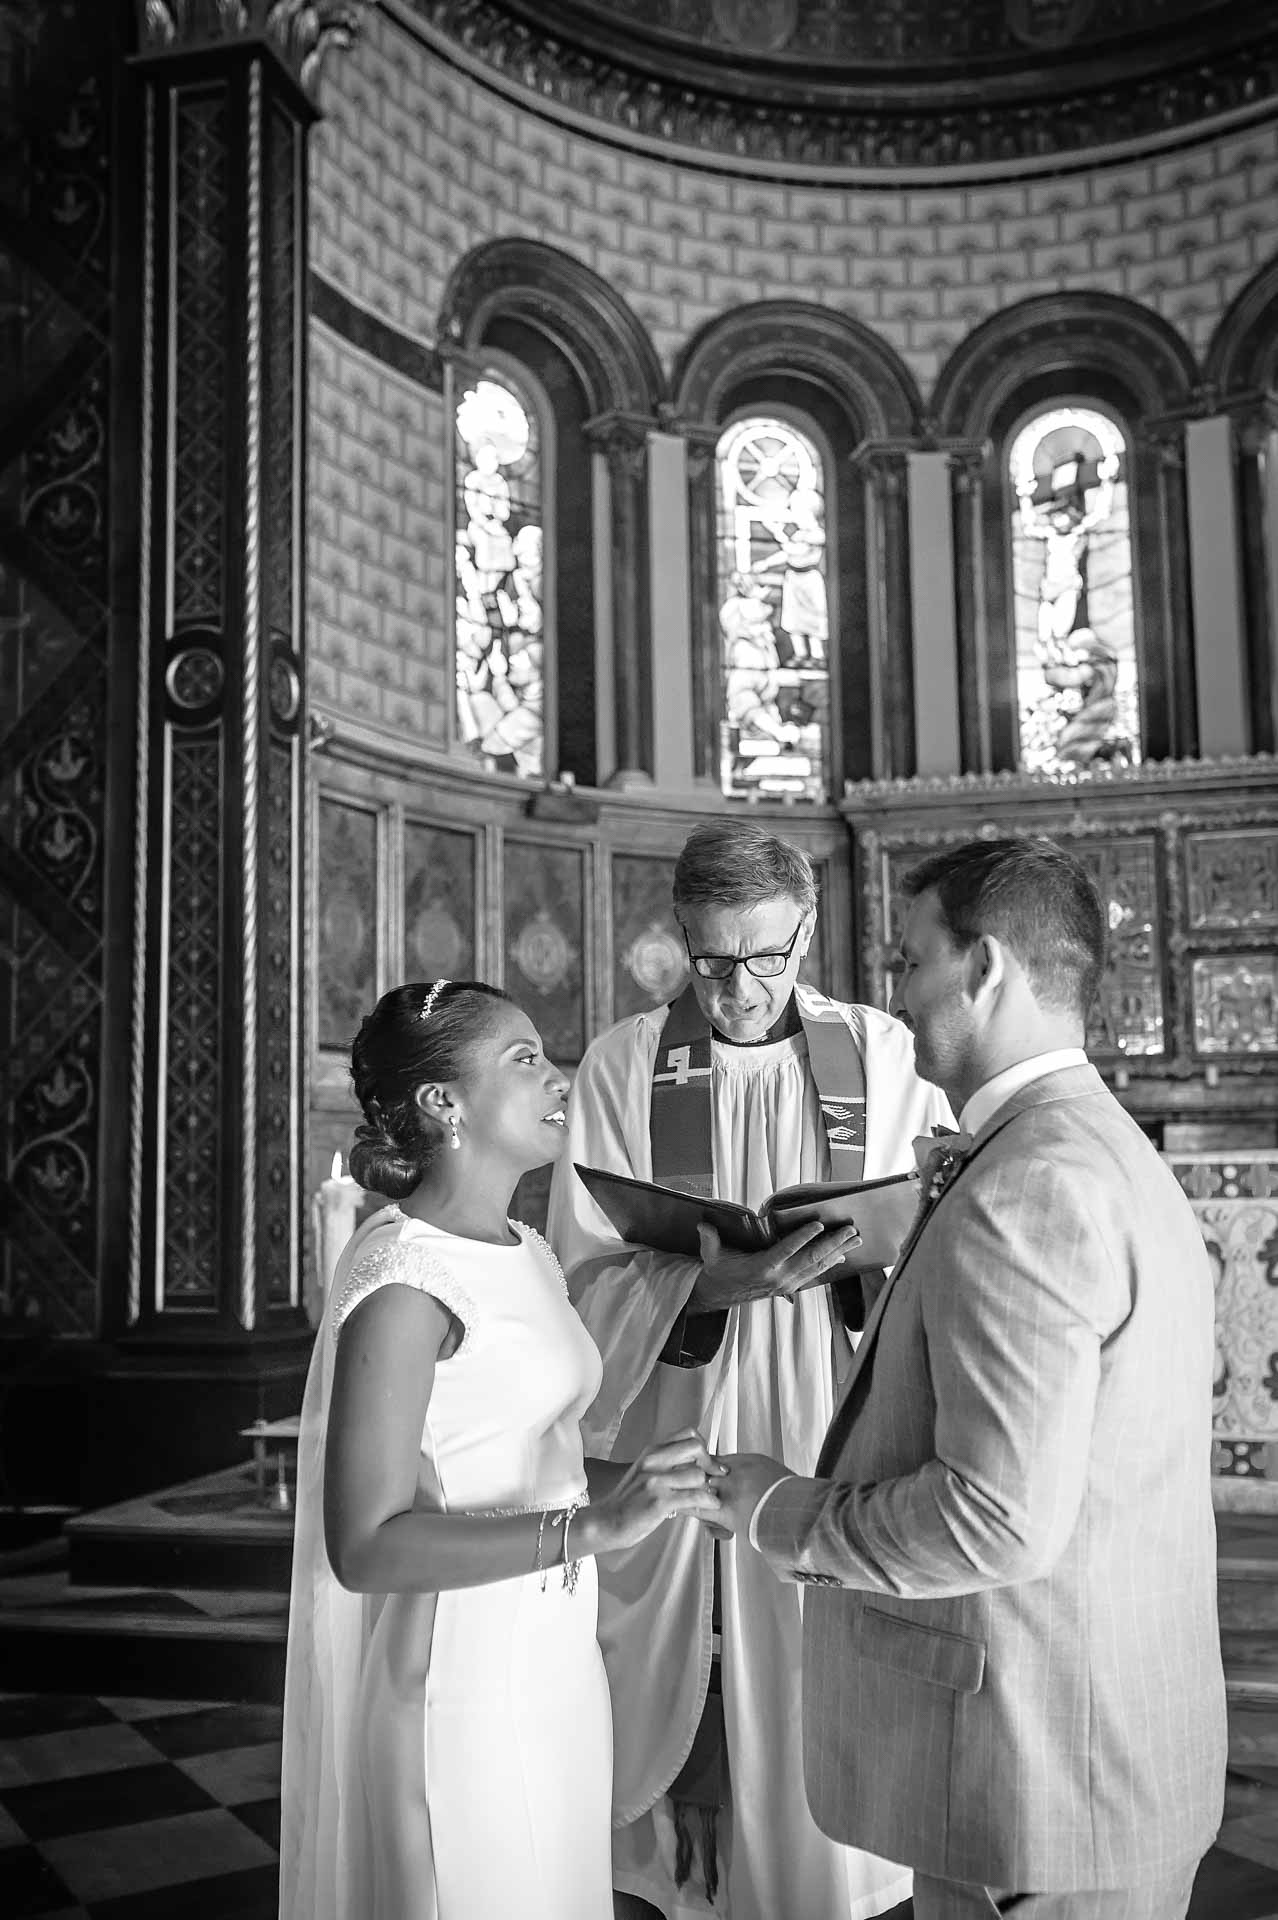 Bride placing ring on Groom's finger at King's College Chapel Wedding